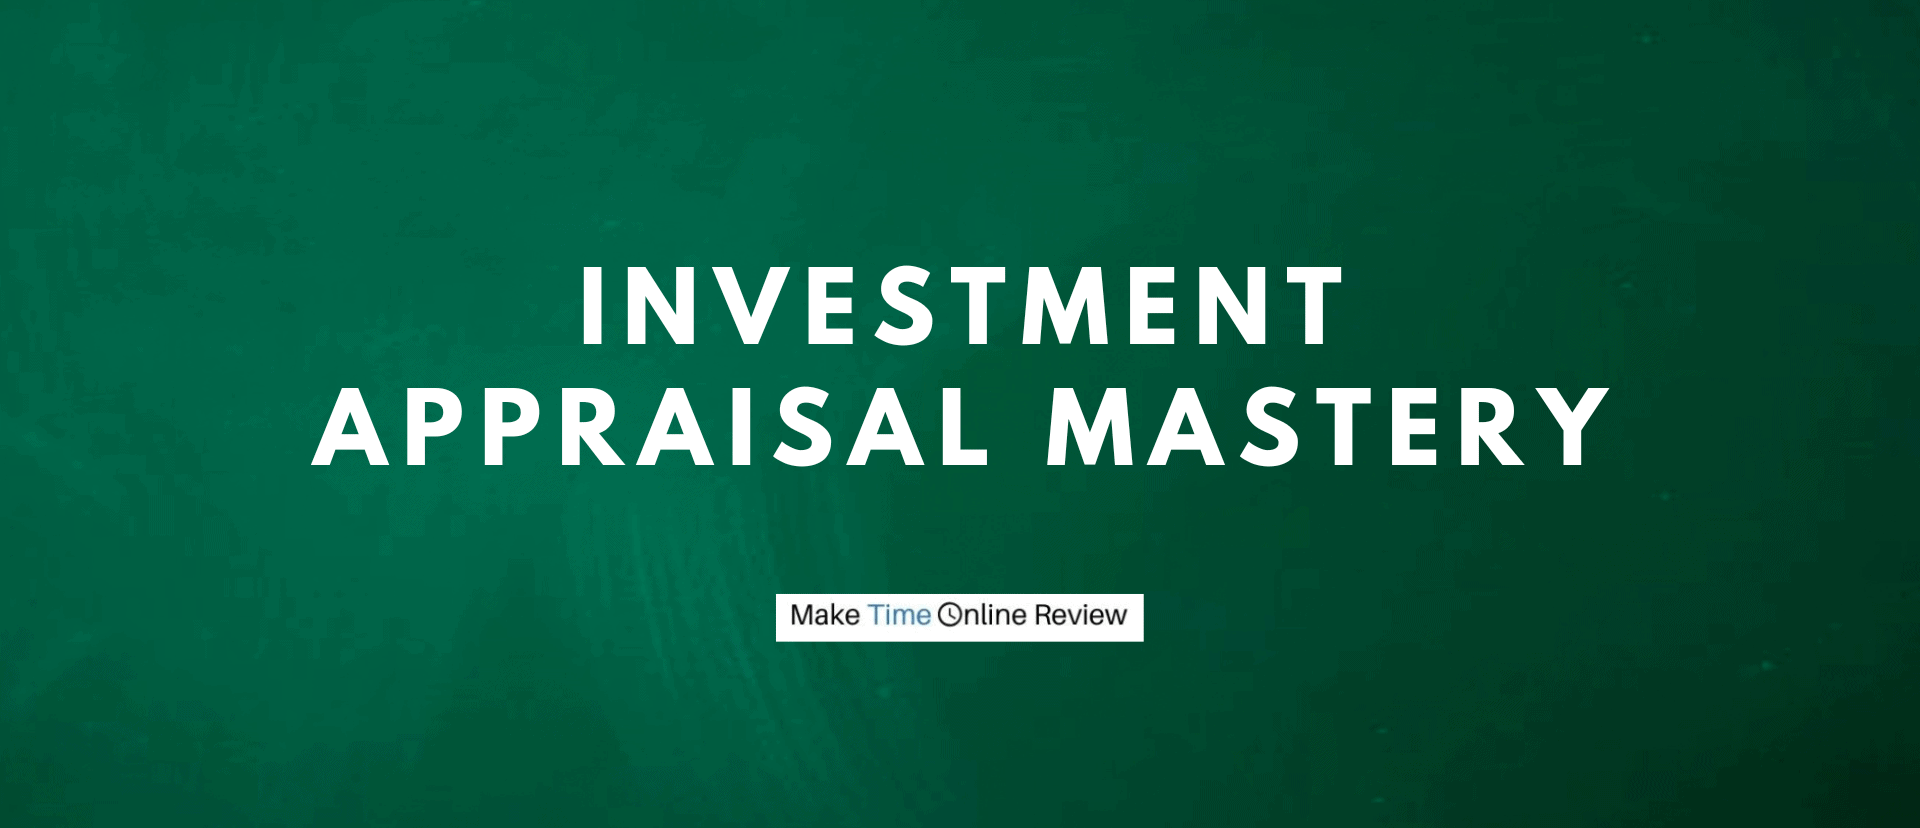 Investment Appraisal Mastery